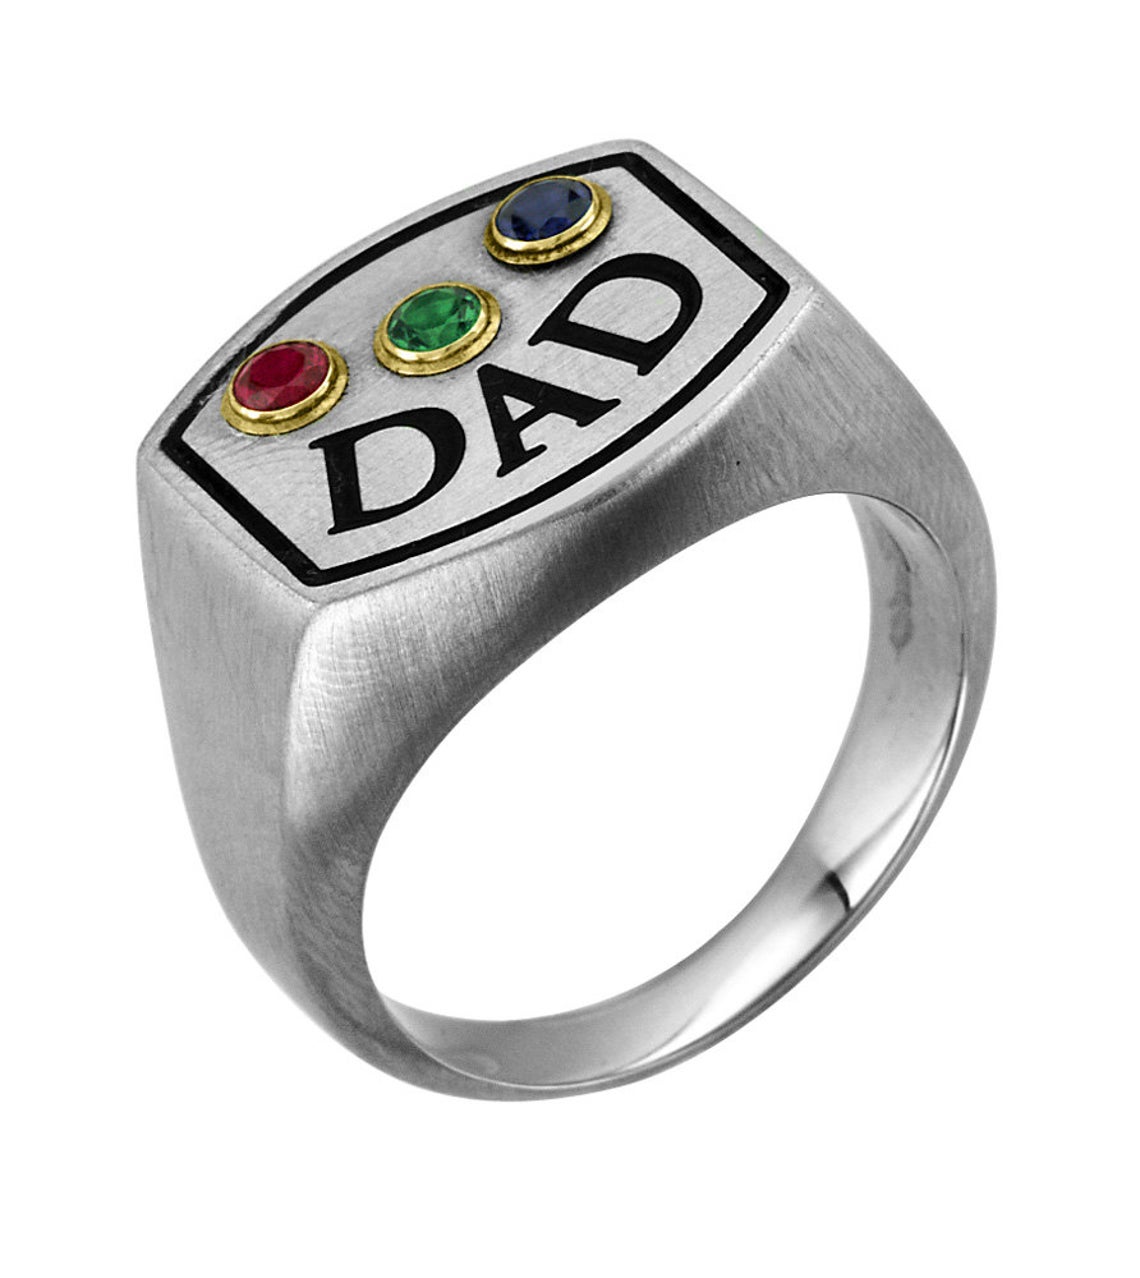 Men's "DAD" Ring in Stainless Steel With Three Personalized Birthstones